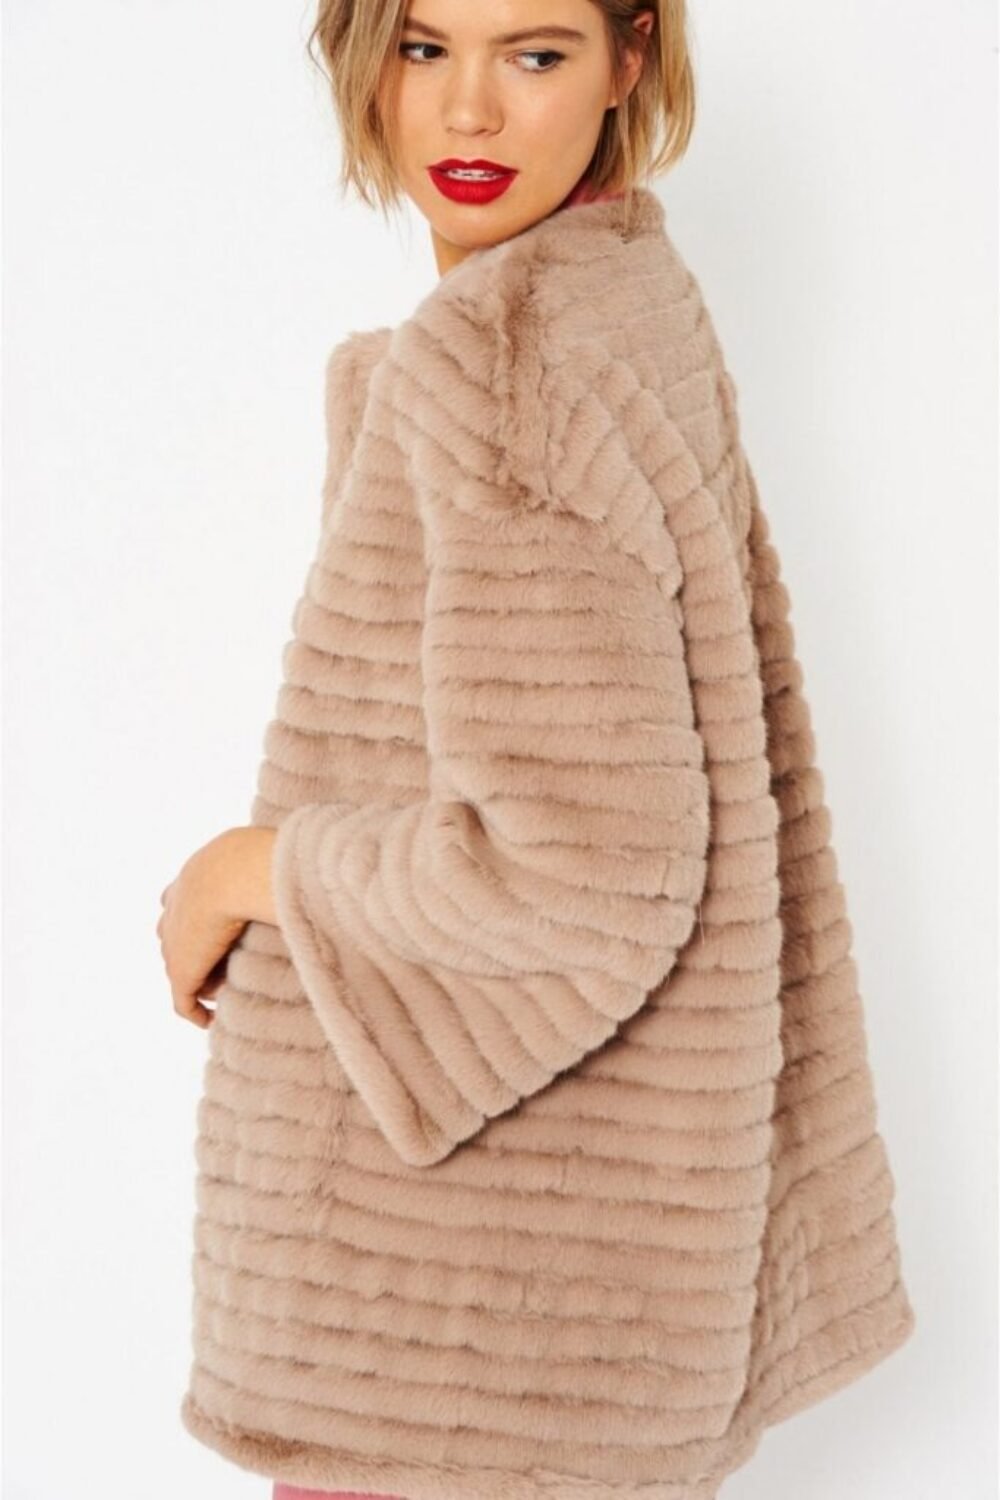 Shop Lux Mocha Faux Fur Over-Sized Coat and women's luxury and designer clothes at www.lux-apparel.co.uk